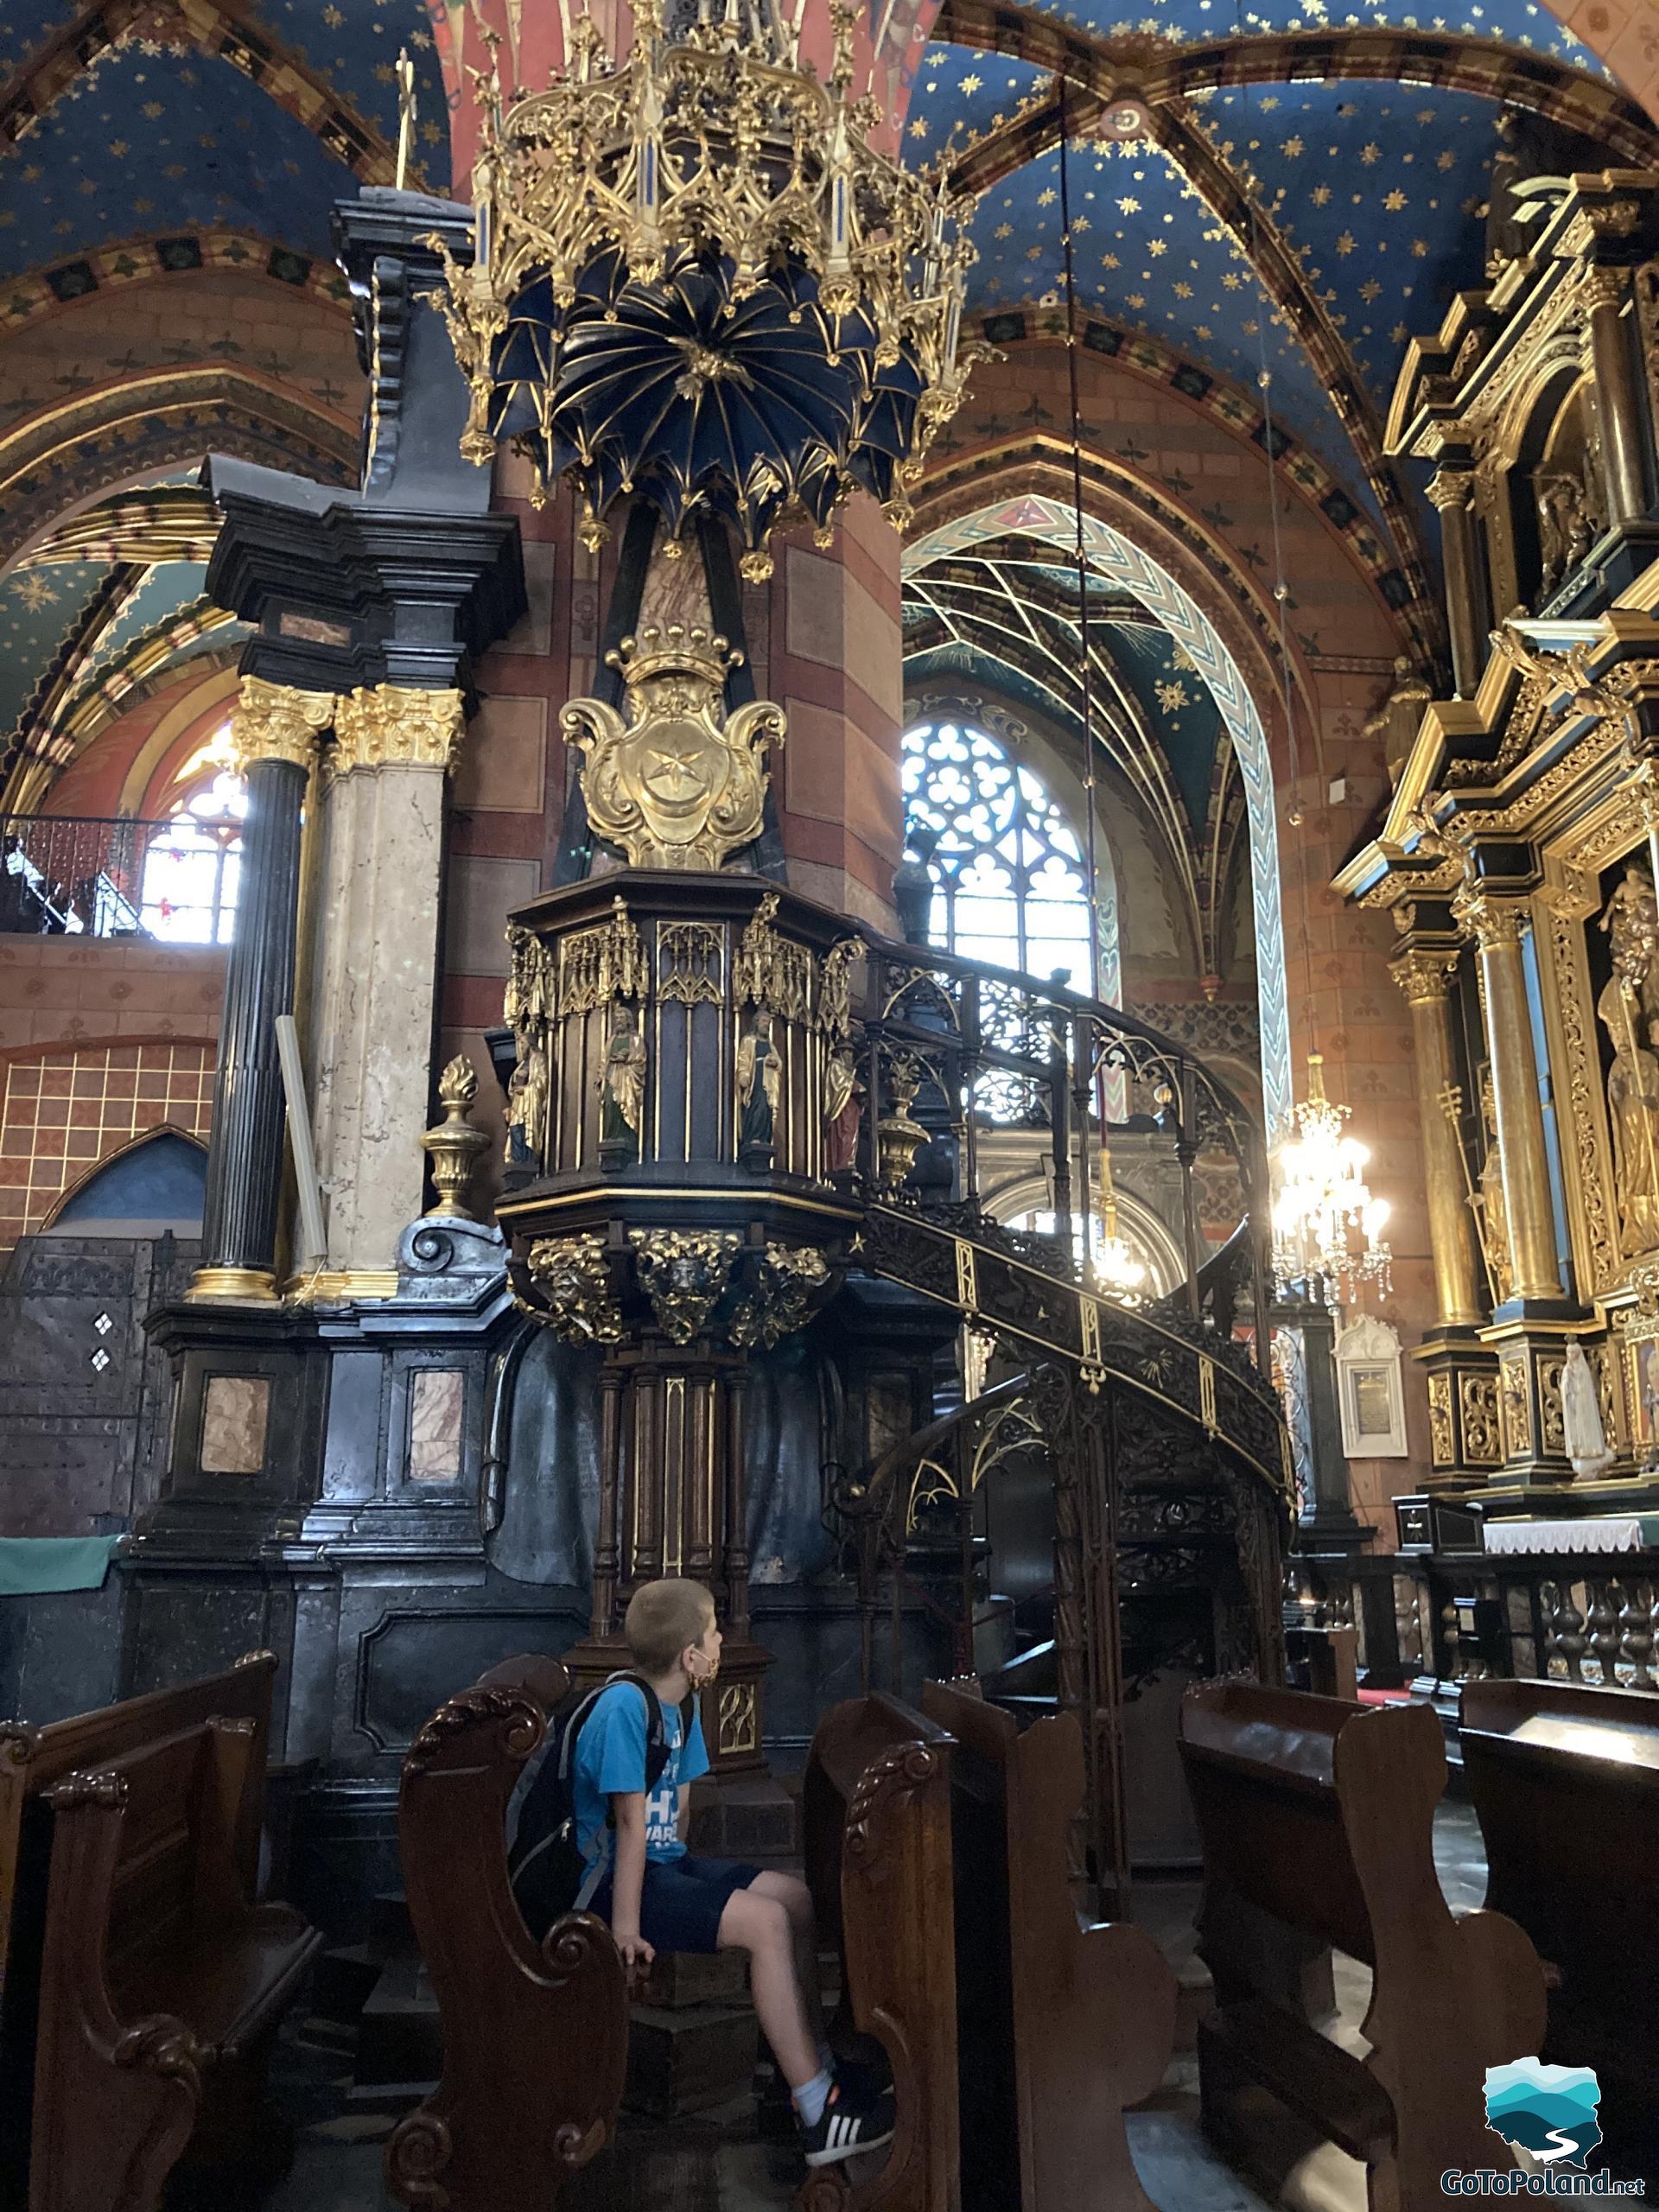 a boy is sitting in a pew, above him, there is a black and gold pulpit, ceiling of the church is blue